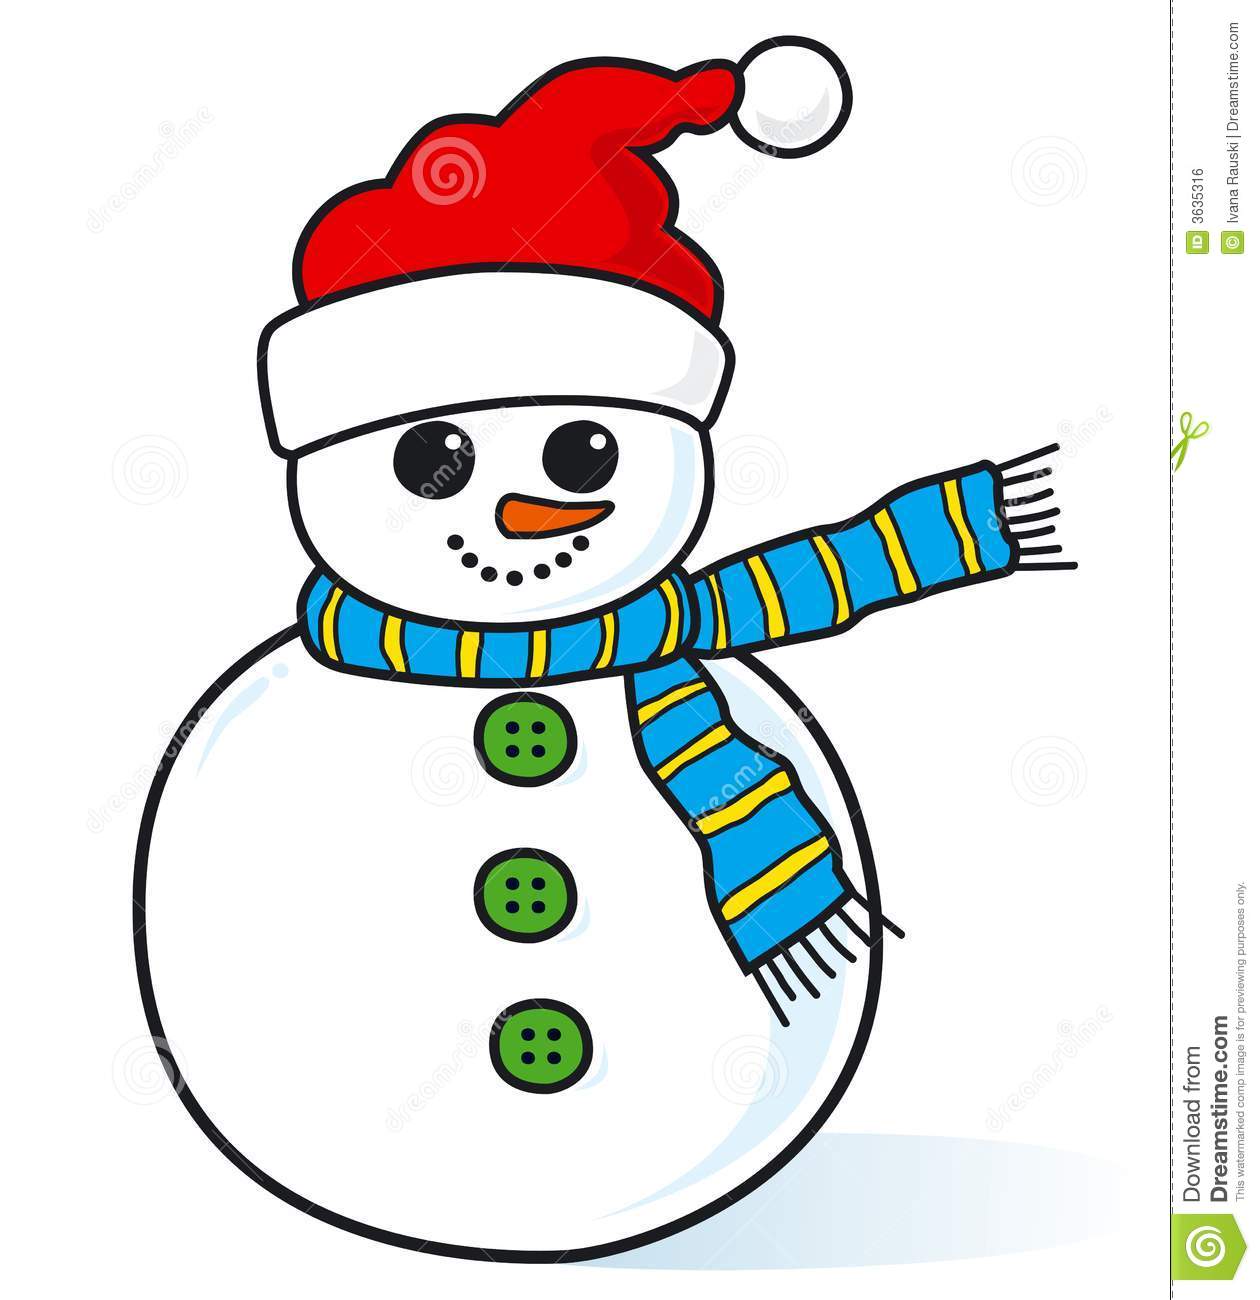 Cute little snowman royalty free stock image image 6